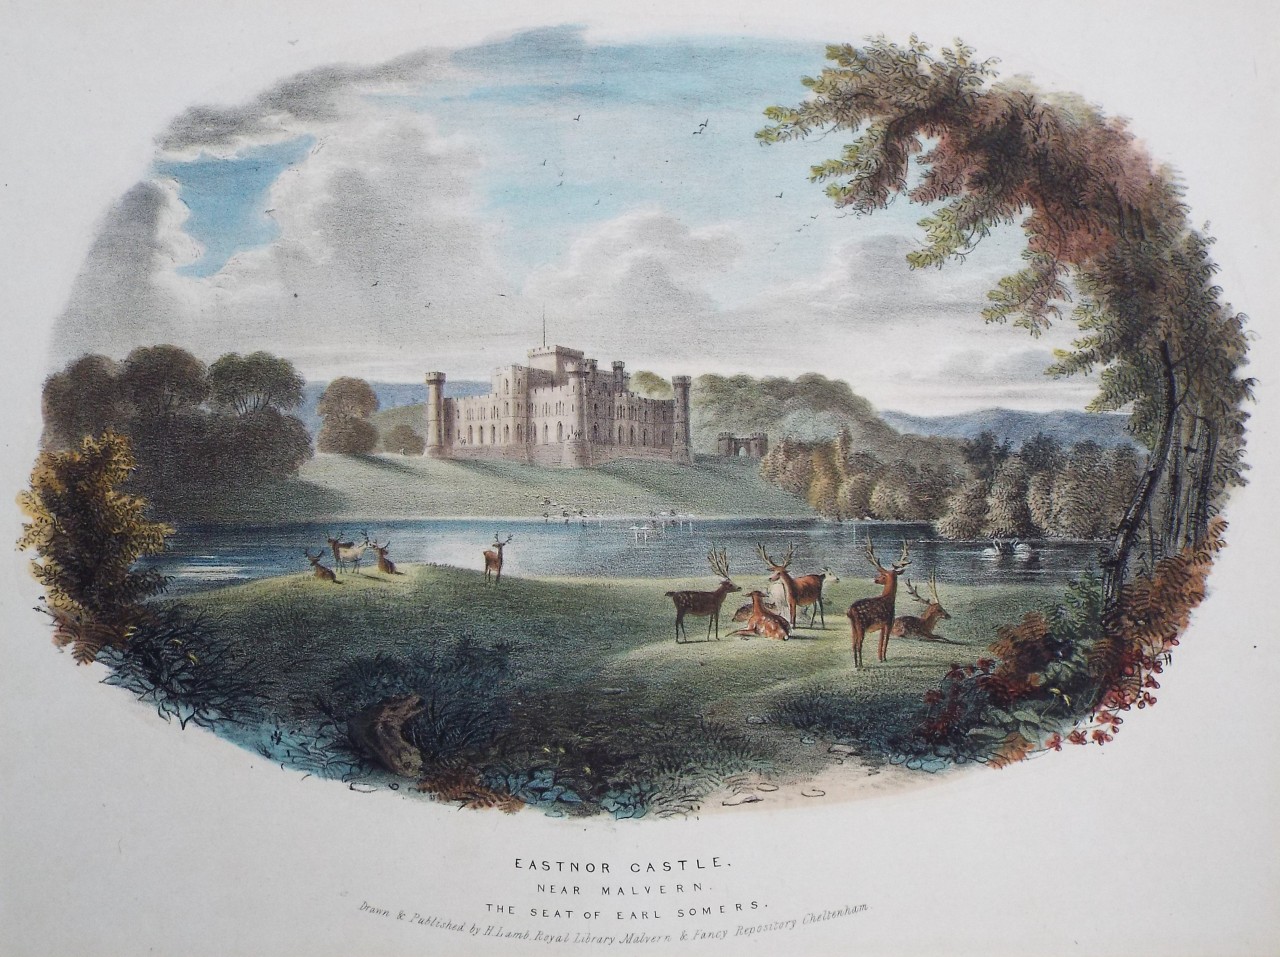 Lithograph - Eastnor Castle, near Malvern. The Seat of Earl Somers. - Lamb